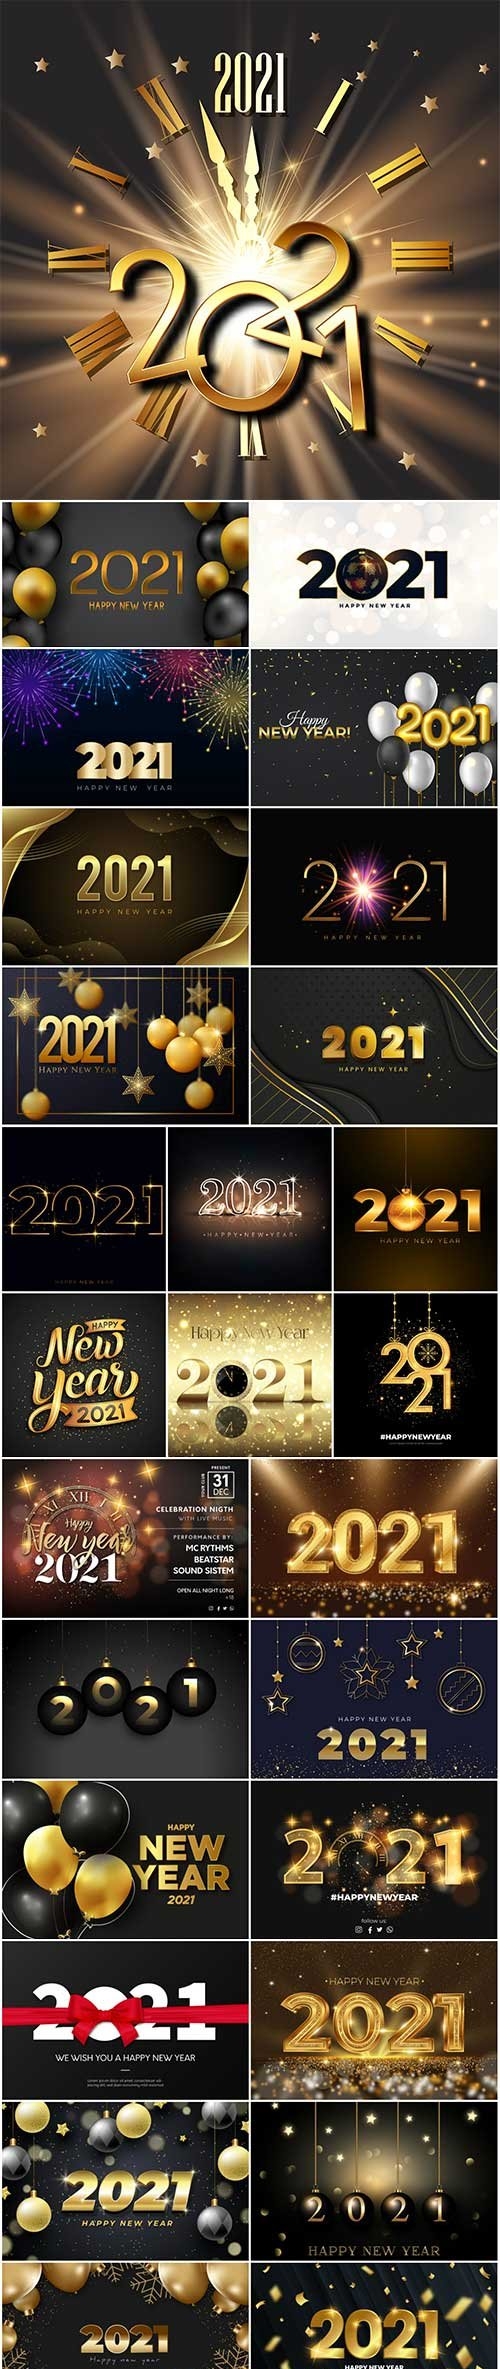 Happy new year 2021 night event vector poster with golden texture